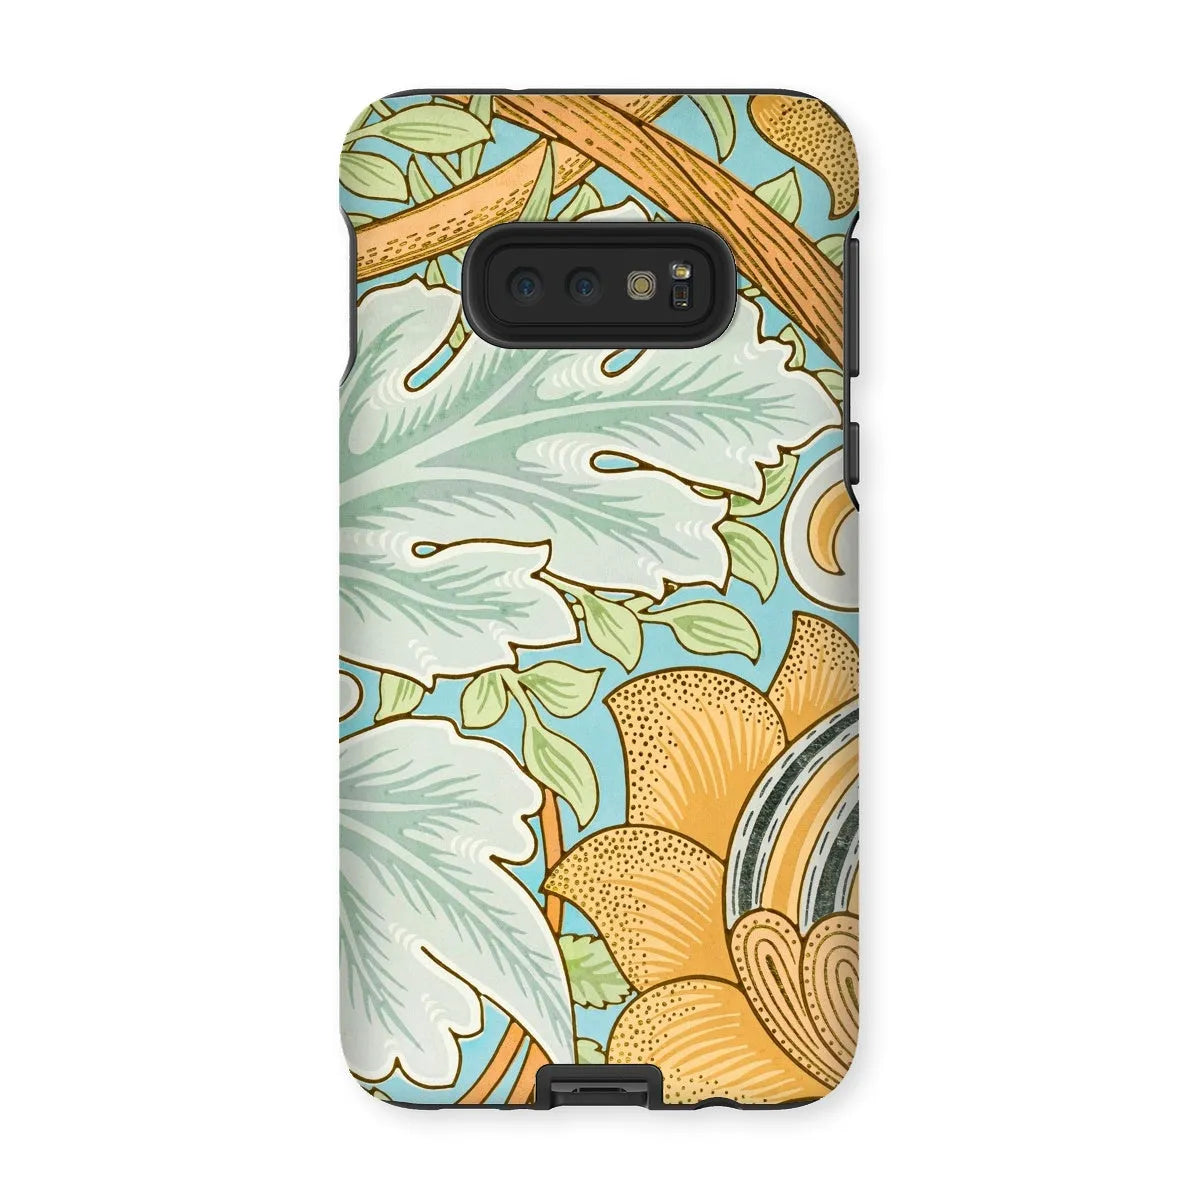 St. James - Arts And Crafts Phone Case - William Morris - Samsung Galaxy S10e / Matte - Mobile Phone Cases - Aesthetic